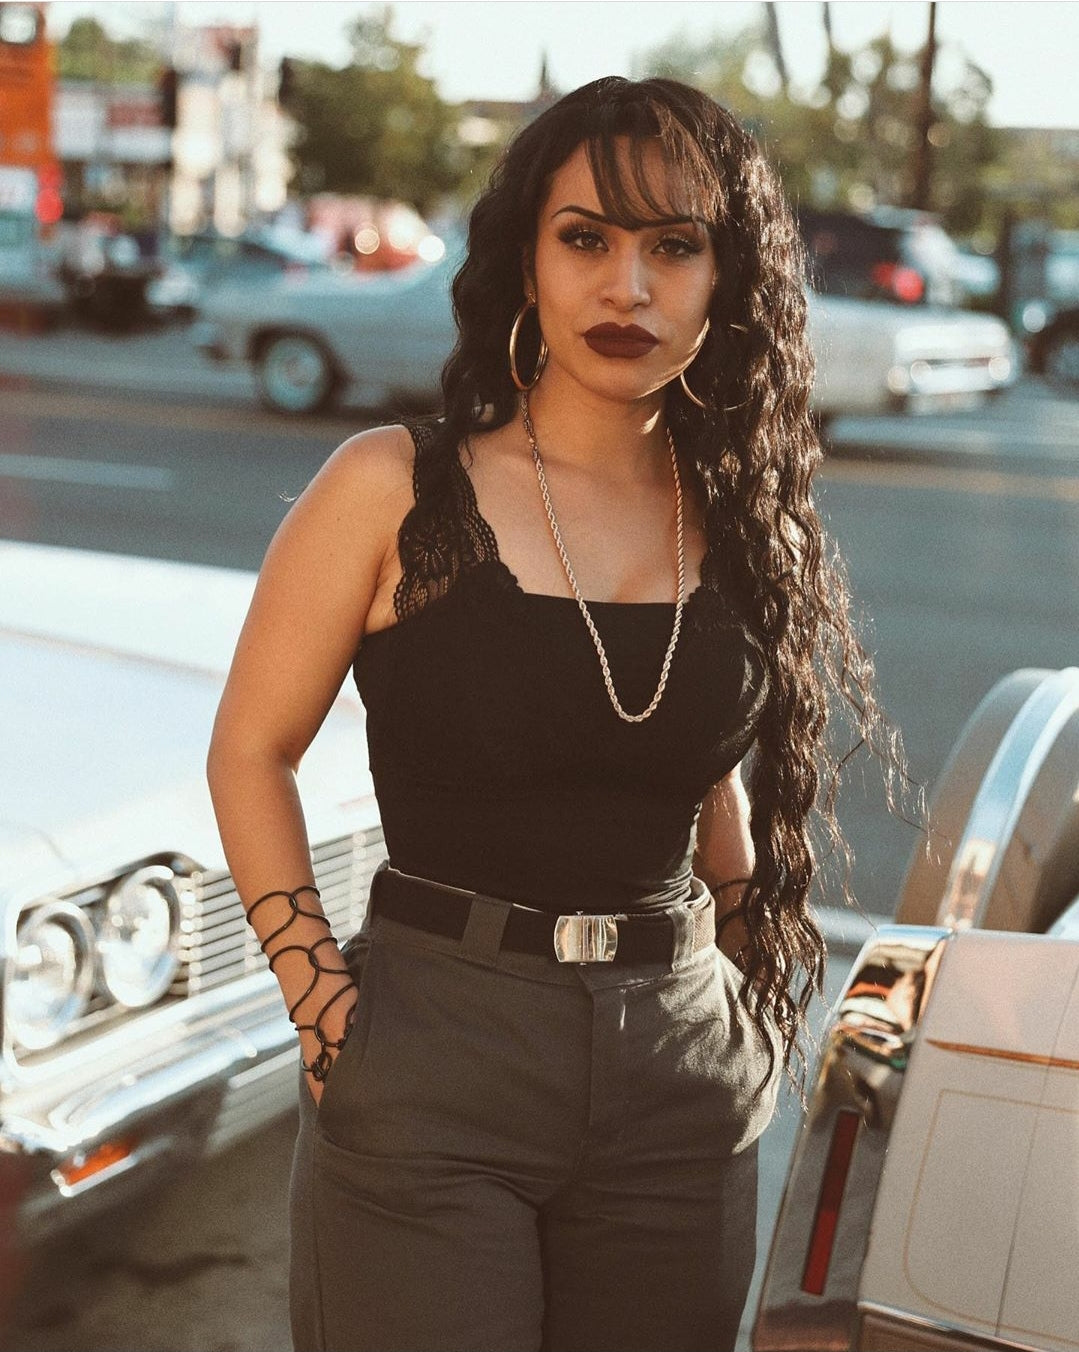 Brown indigenous chicana women dressed in a classic chola look. Dickies dark gray pants with basic black belt and black cami. She is wearing our big glam hoops as well as our 26inches twisted chain necklaces. Her hair is down scunched curly but down. Her hair falls down to her hips and has some selena styled bangs. Background san diego streets you can see creamed colored lowrider cars in the background. 